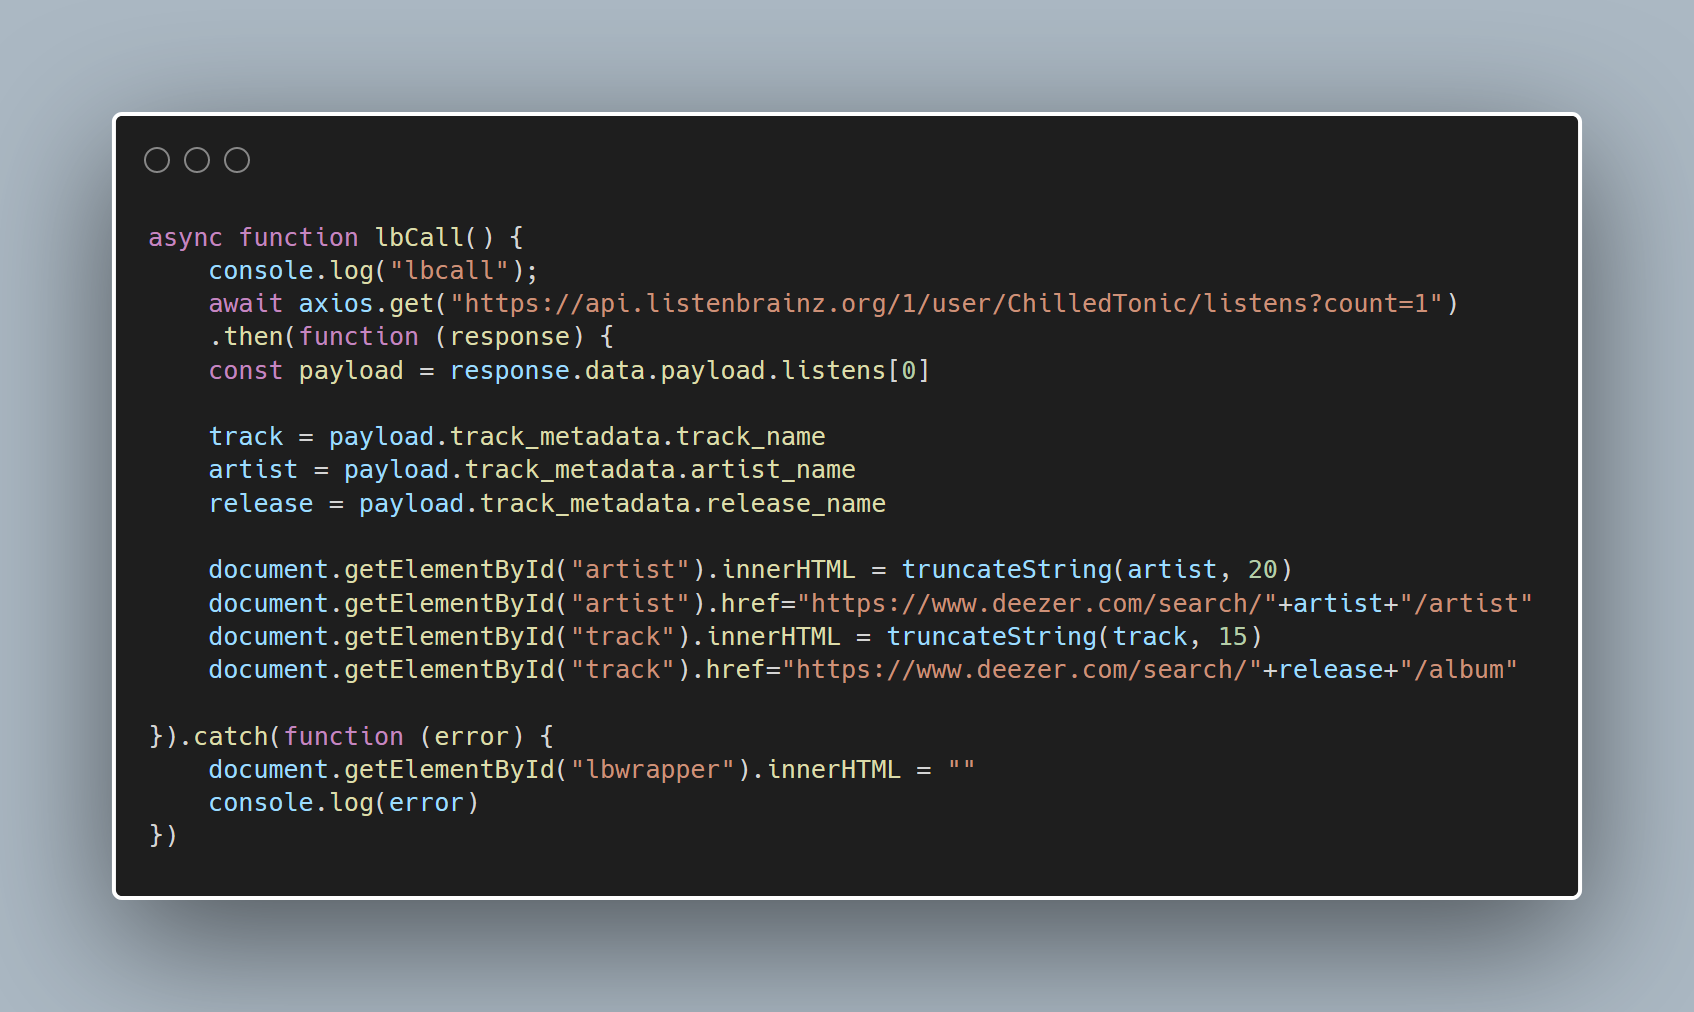 A pretty image of a JavaScript function to pull information from ListenBrainz, listed in text below